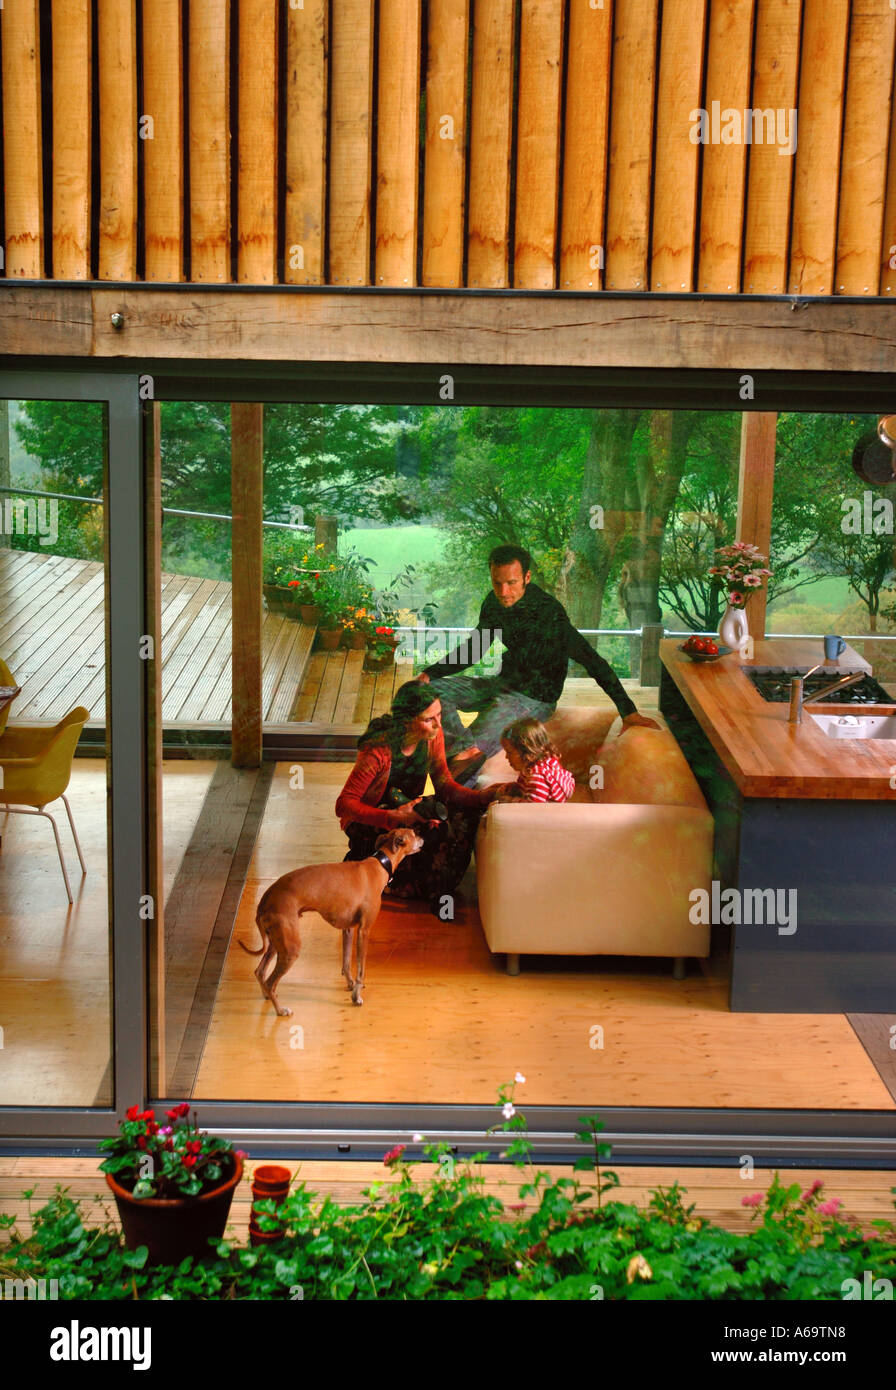 A YOUNG FAMILY IN A MODERN HOUSE WITH LARGE GLASS SLIDING WINDOWS UK Stock Photo